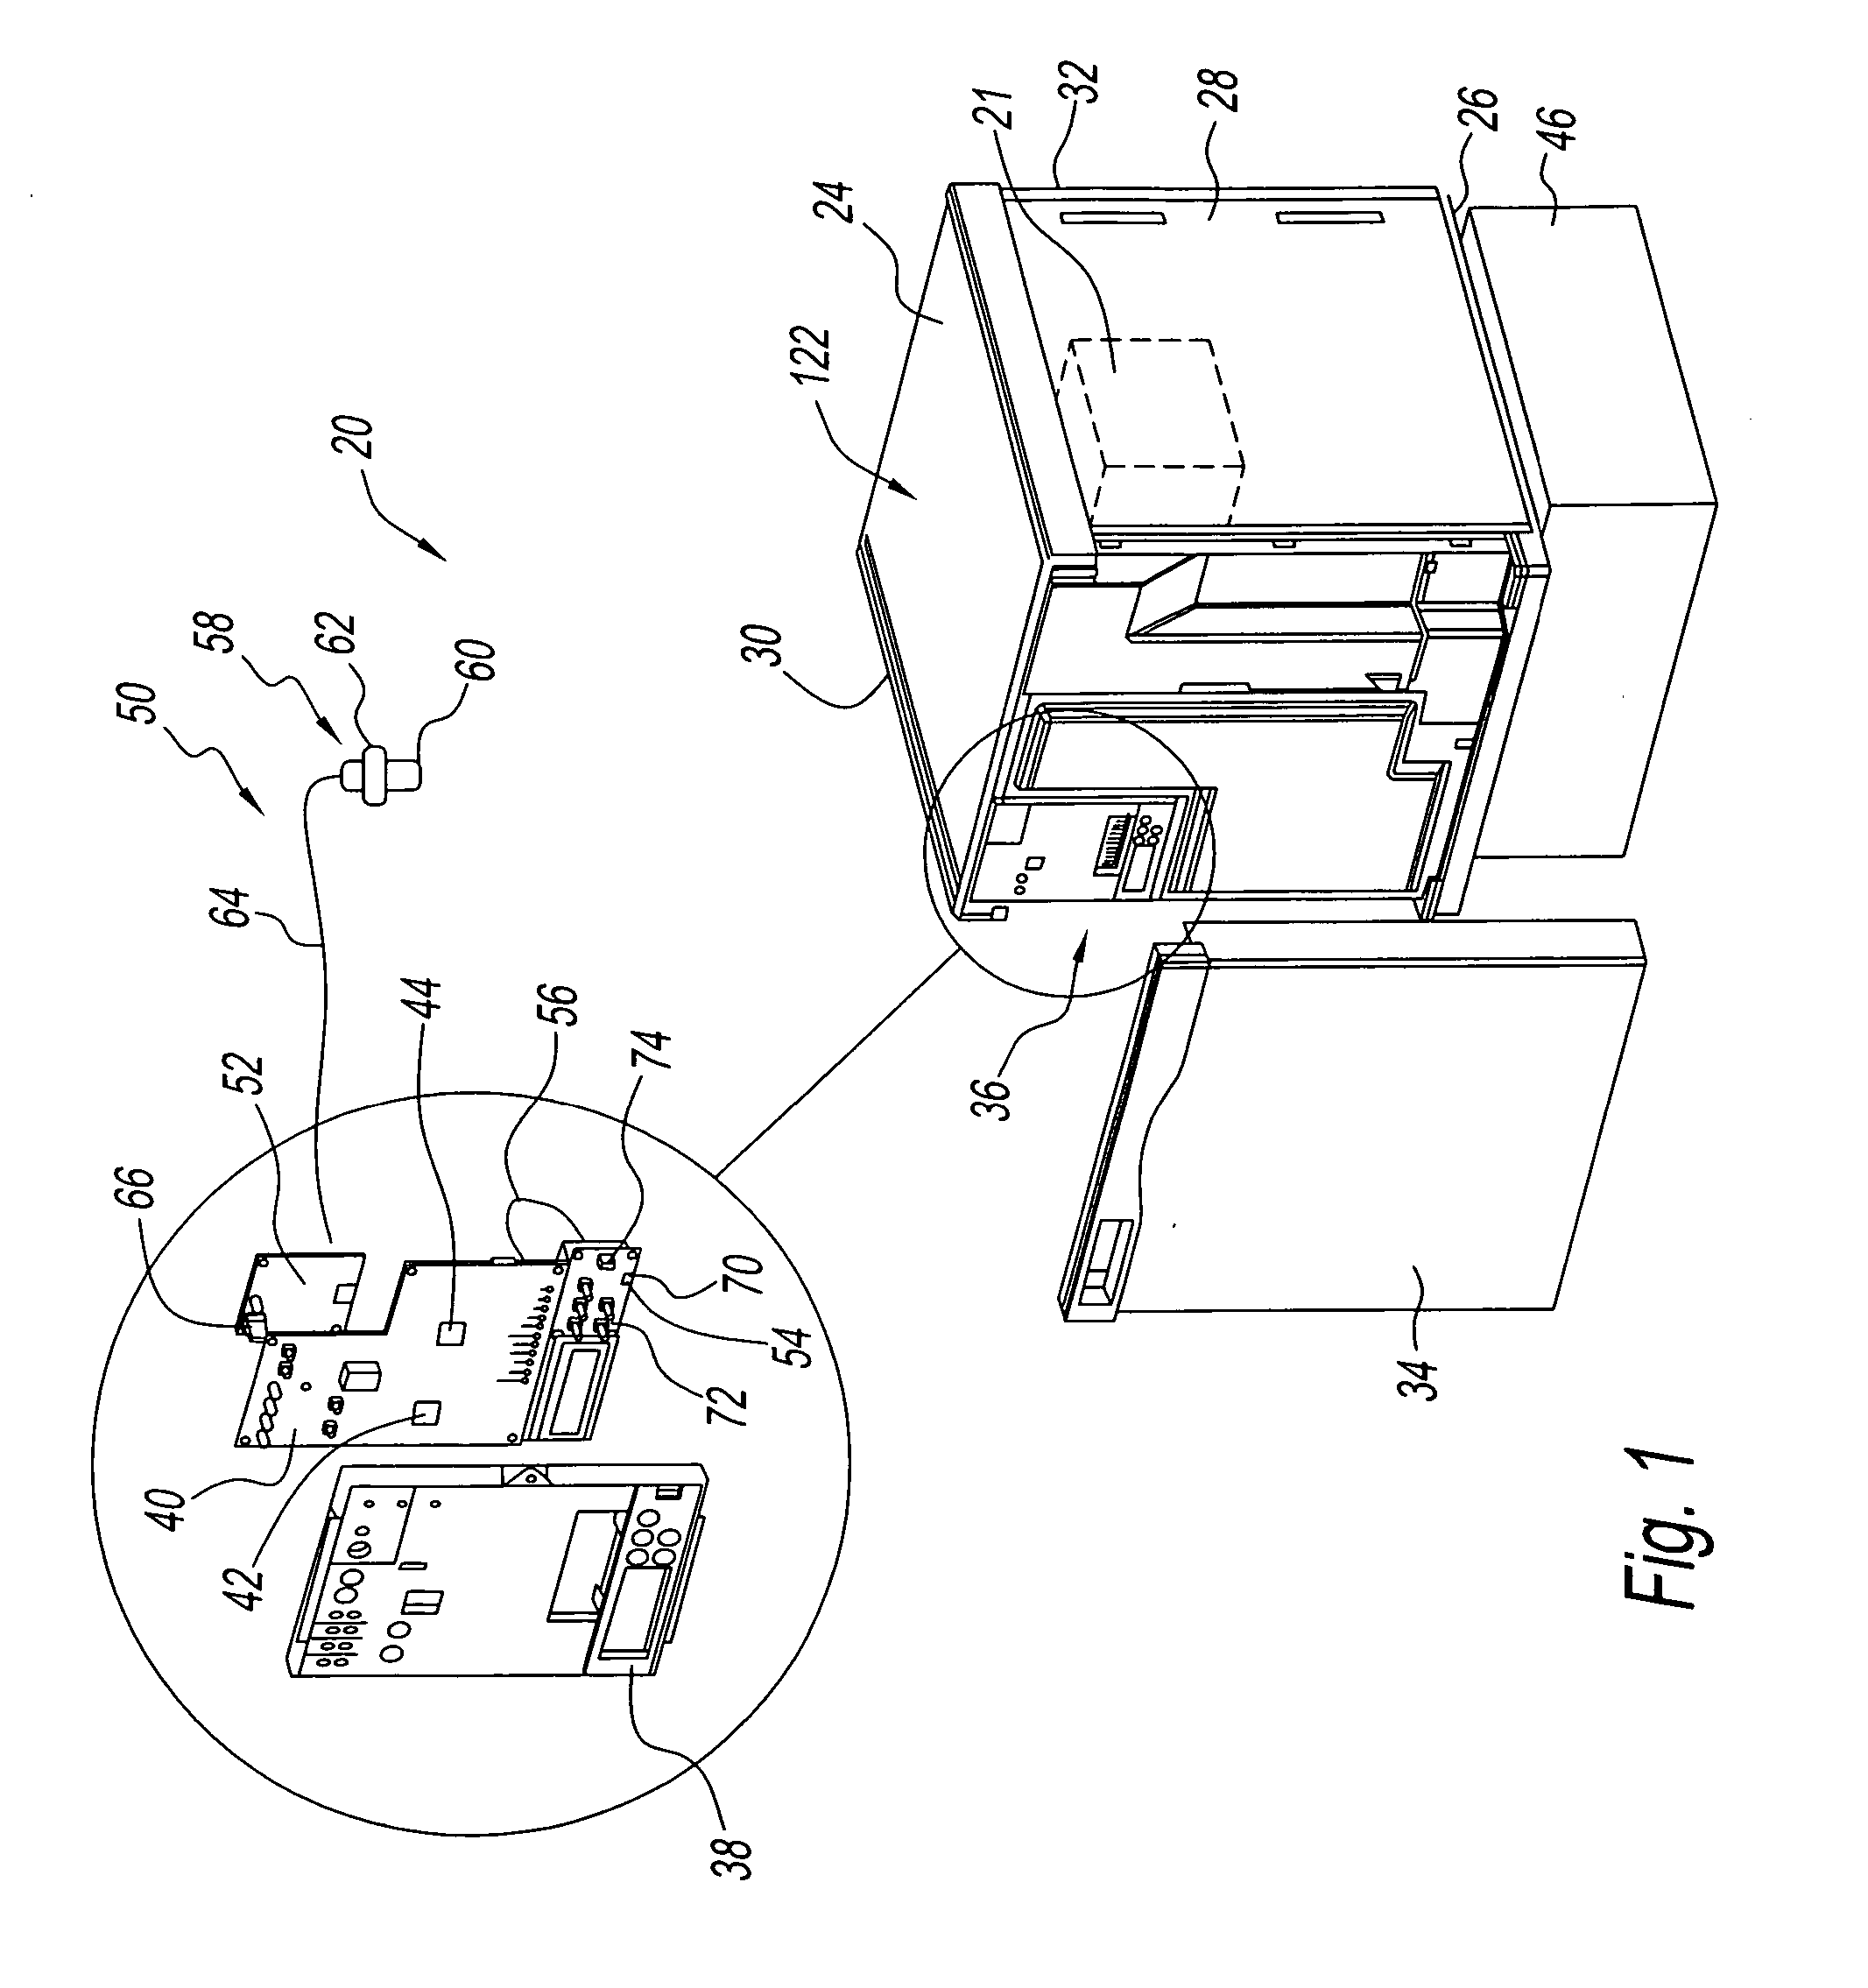 Method and system for regulating the operation of an icemaking machine based to optimize the run time based on variable power rates